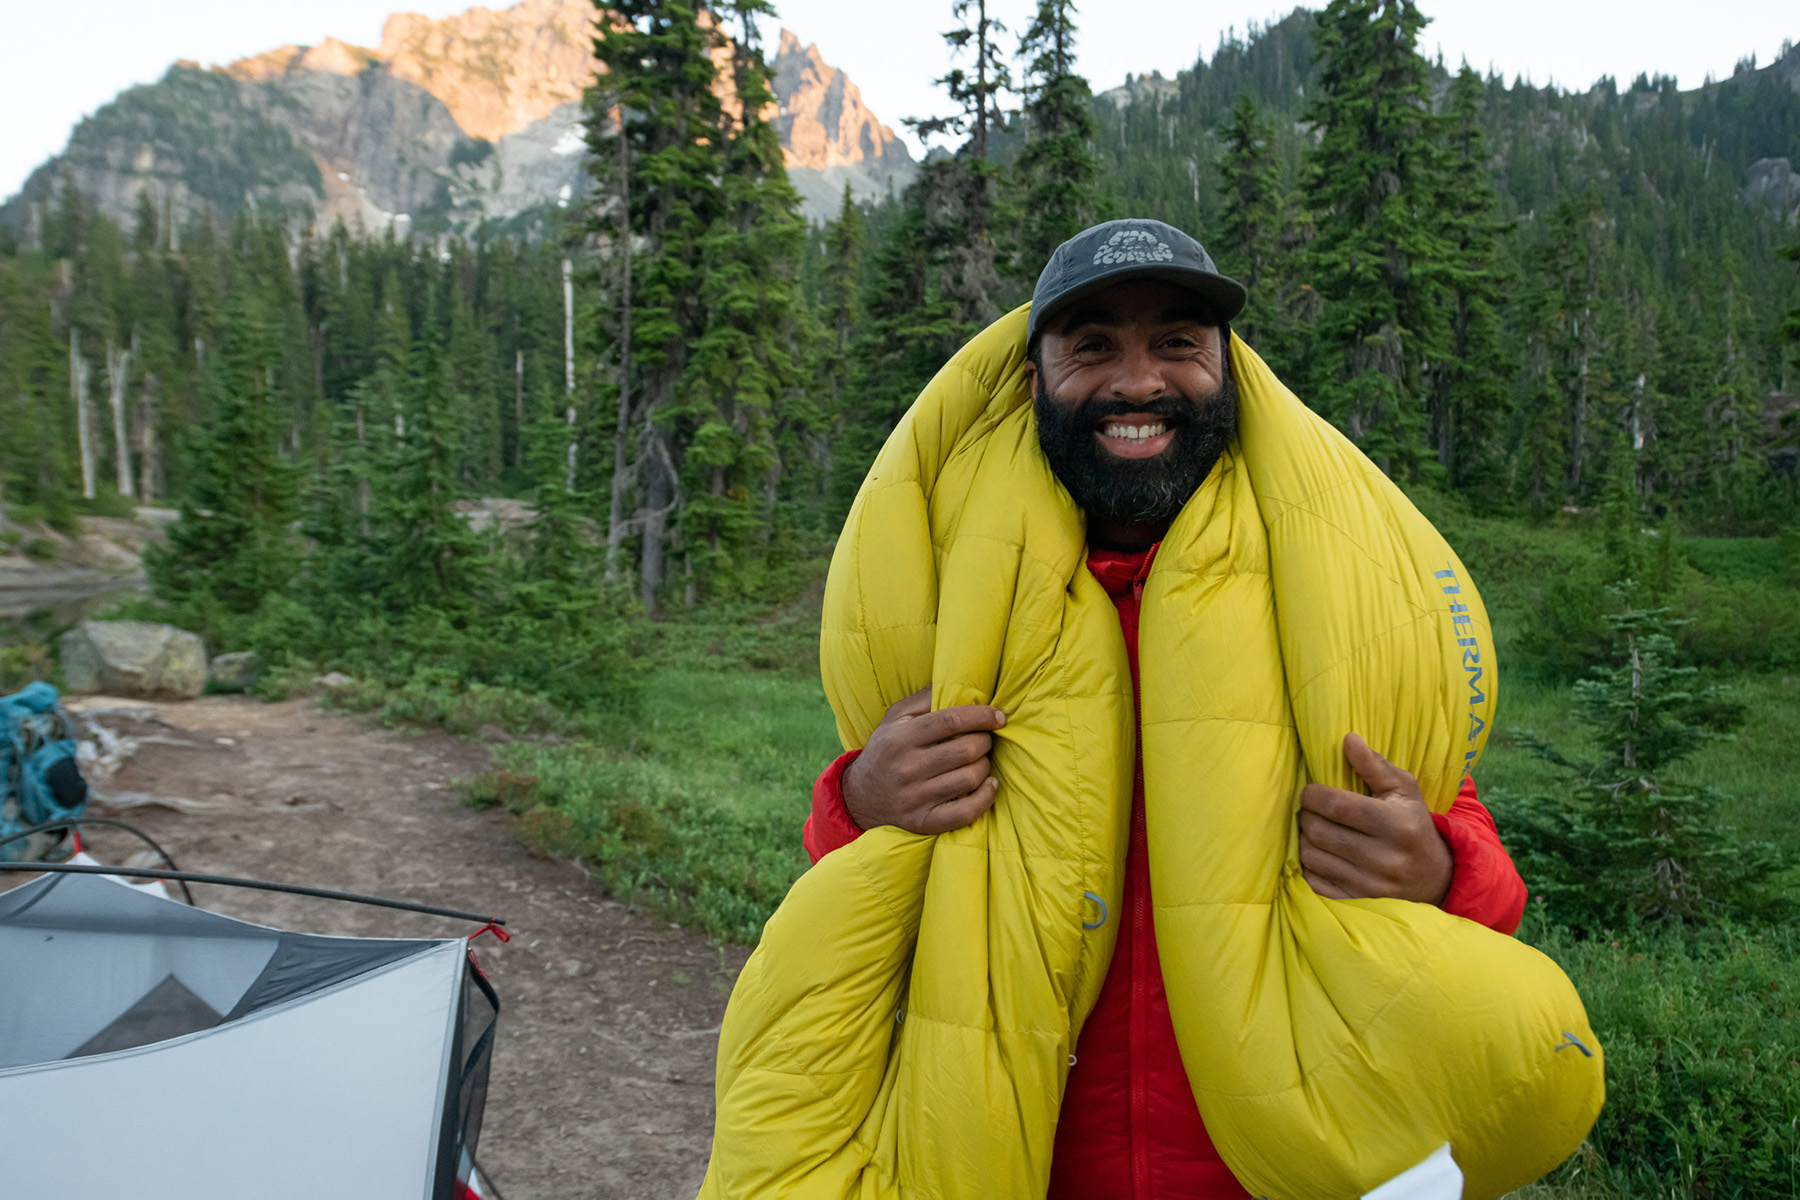 holding Therm-a-Rest sleeping bag